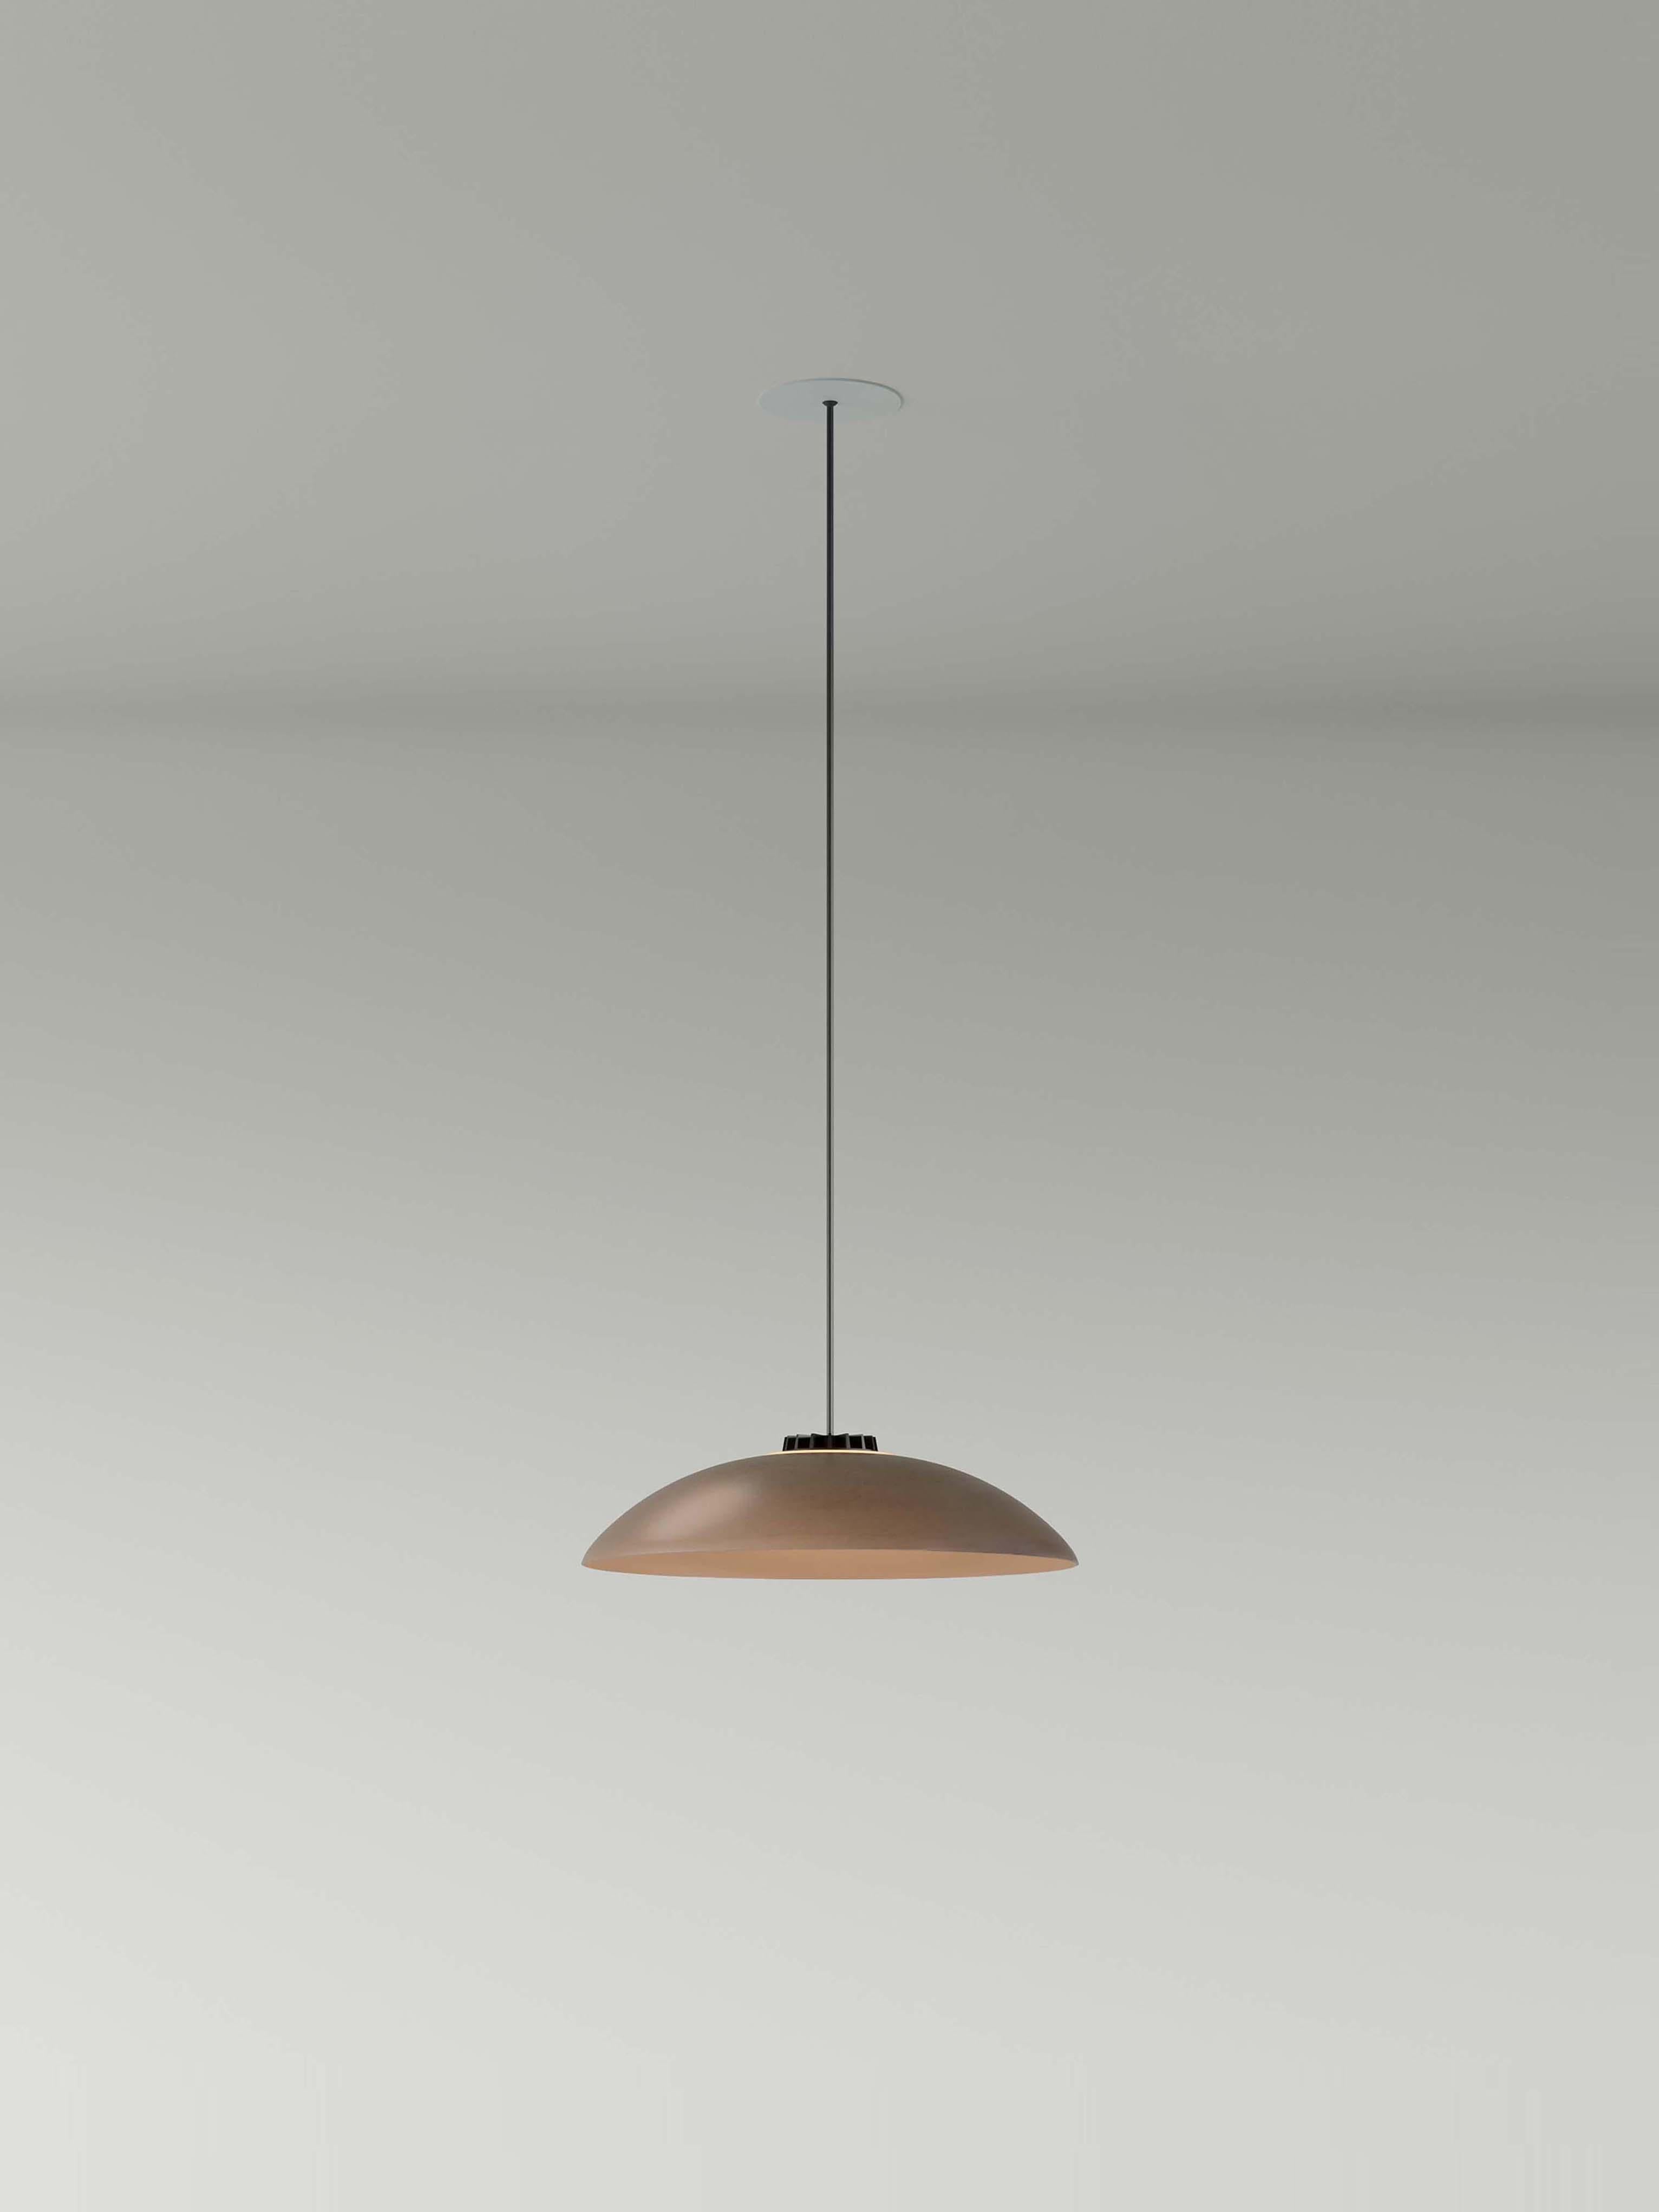 Small brown headhat plate pendant lamp by Santa & Cole
Dimensions: D 35 x H 9 cm
Materials: Metal.
Cable lenght: 3mts.
Available in other colors and sizes. Available in 2 cable lengths: 3mts, 8mts.
Availalble in 2 canopy colors: black or